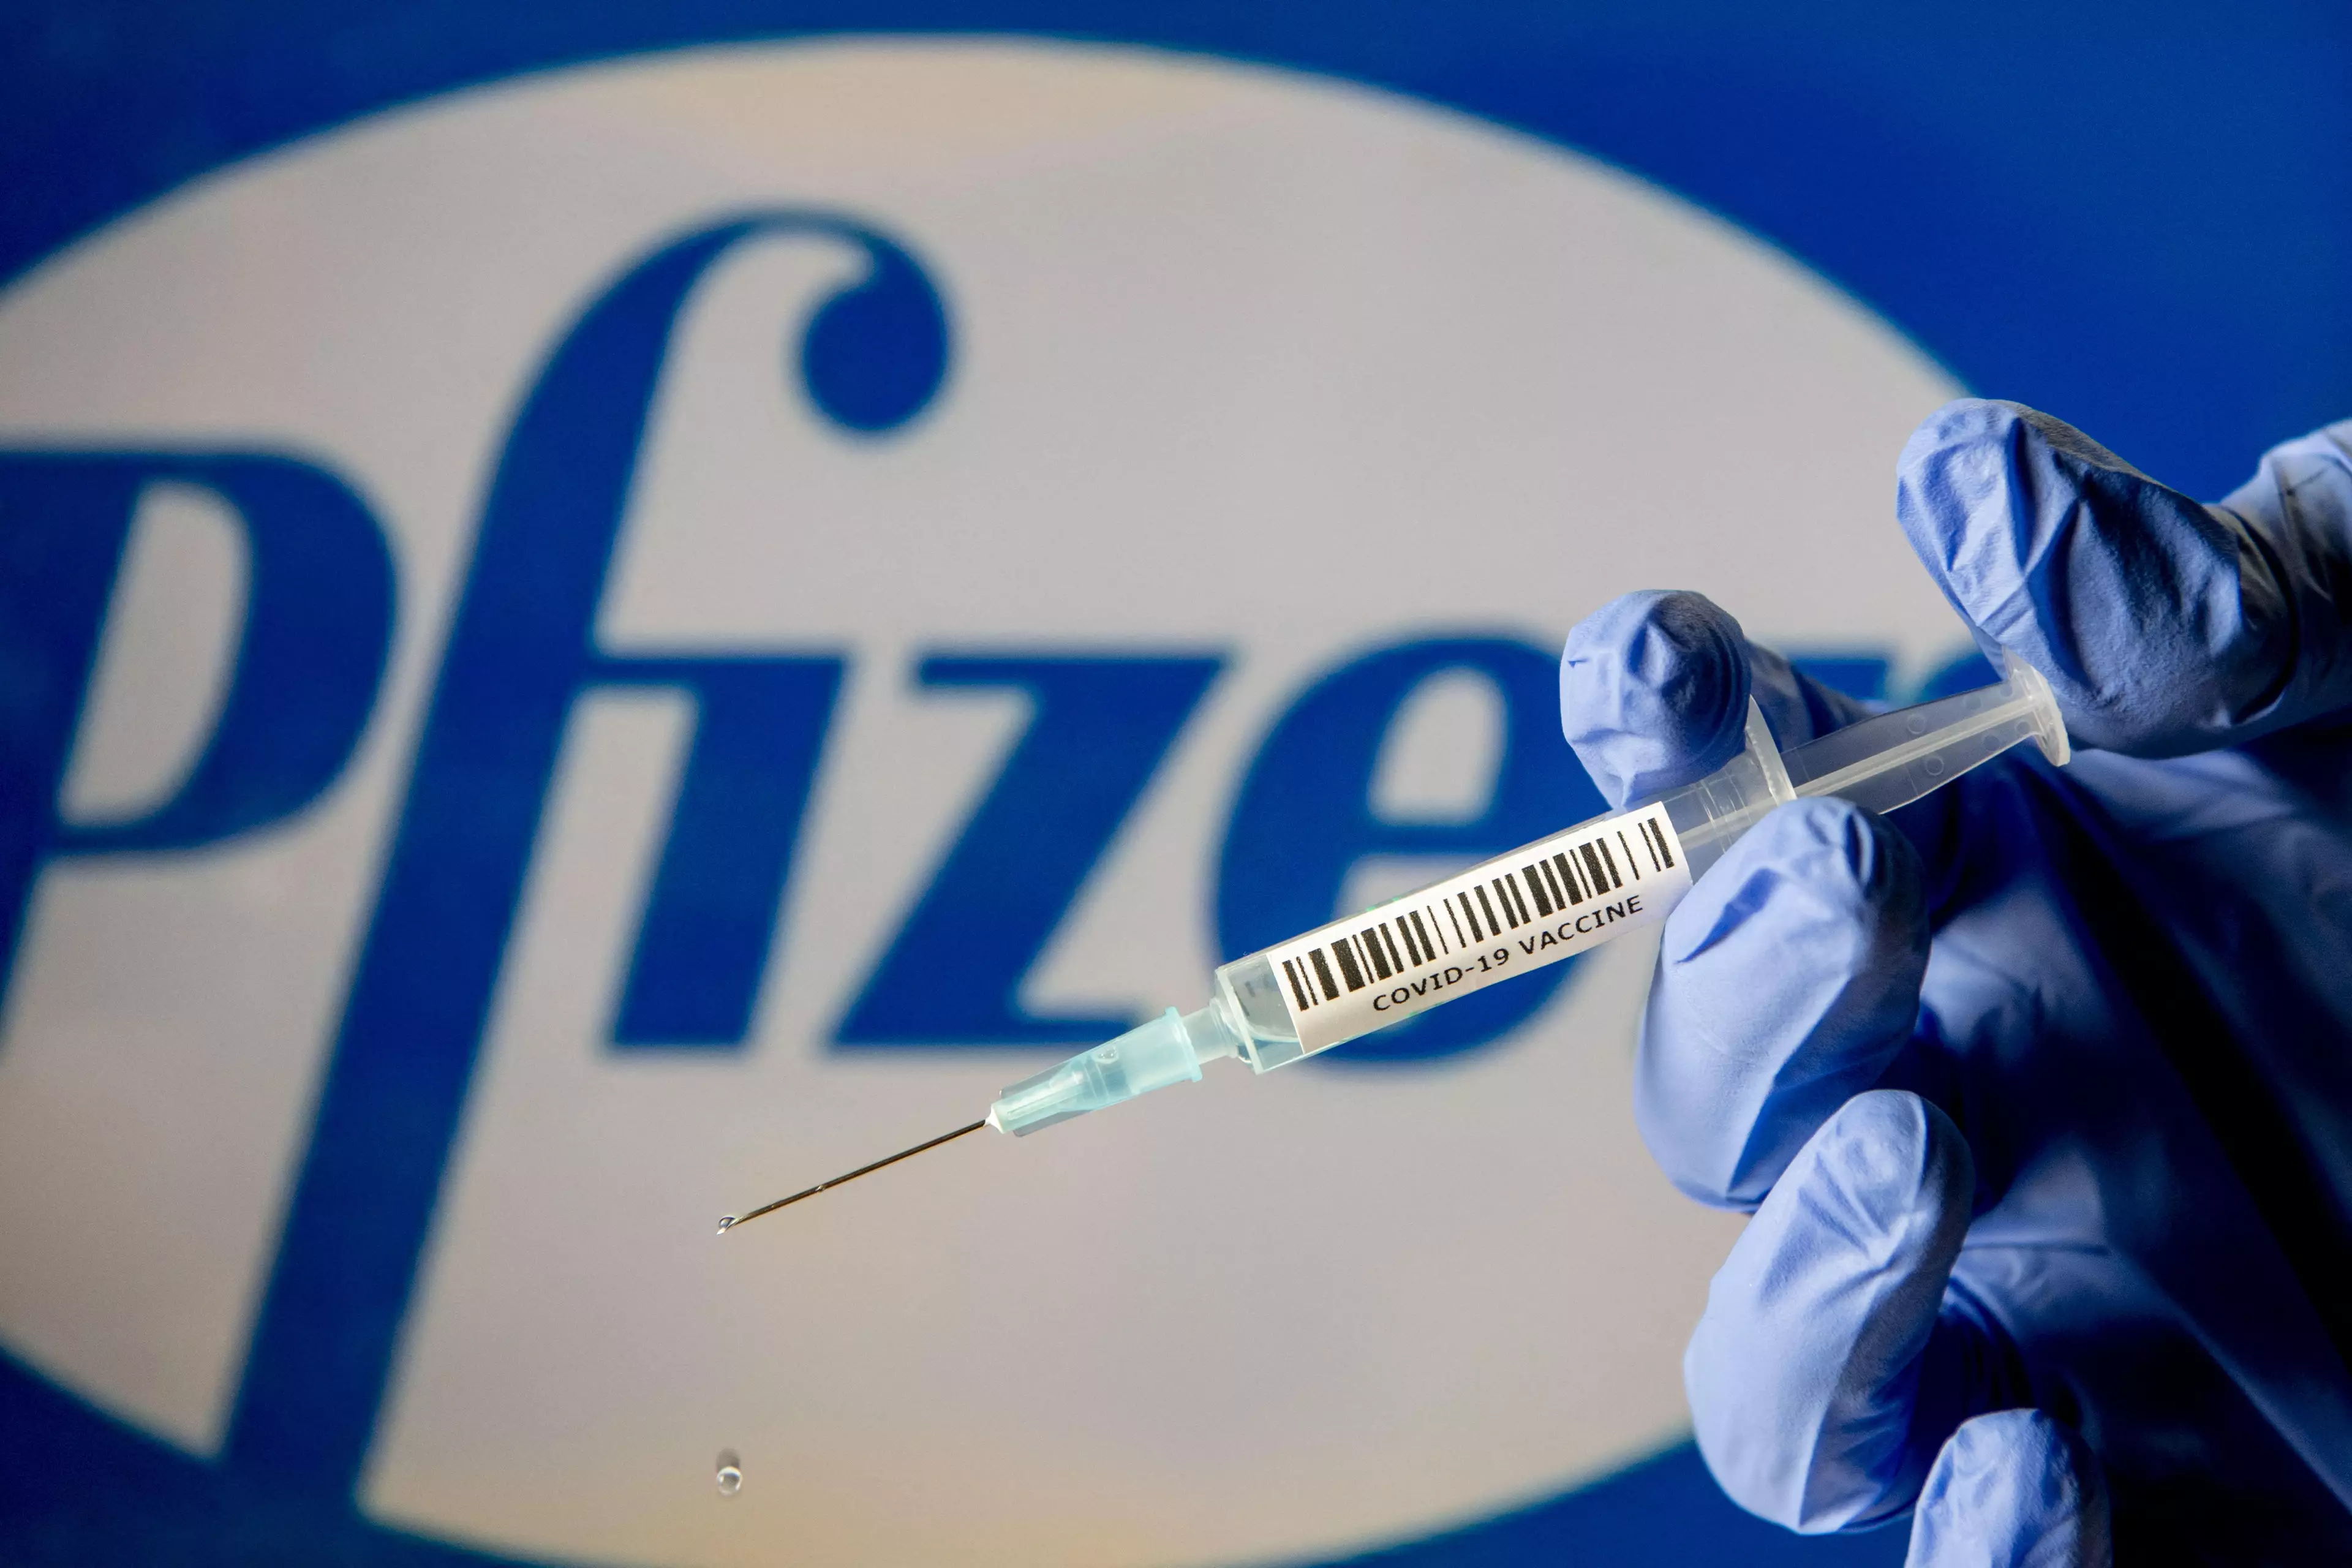 There are 800,000 doses of the Pfizer vaccine set to be administered over the coming weeks (